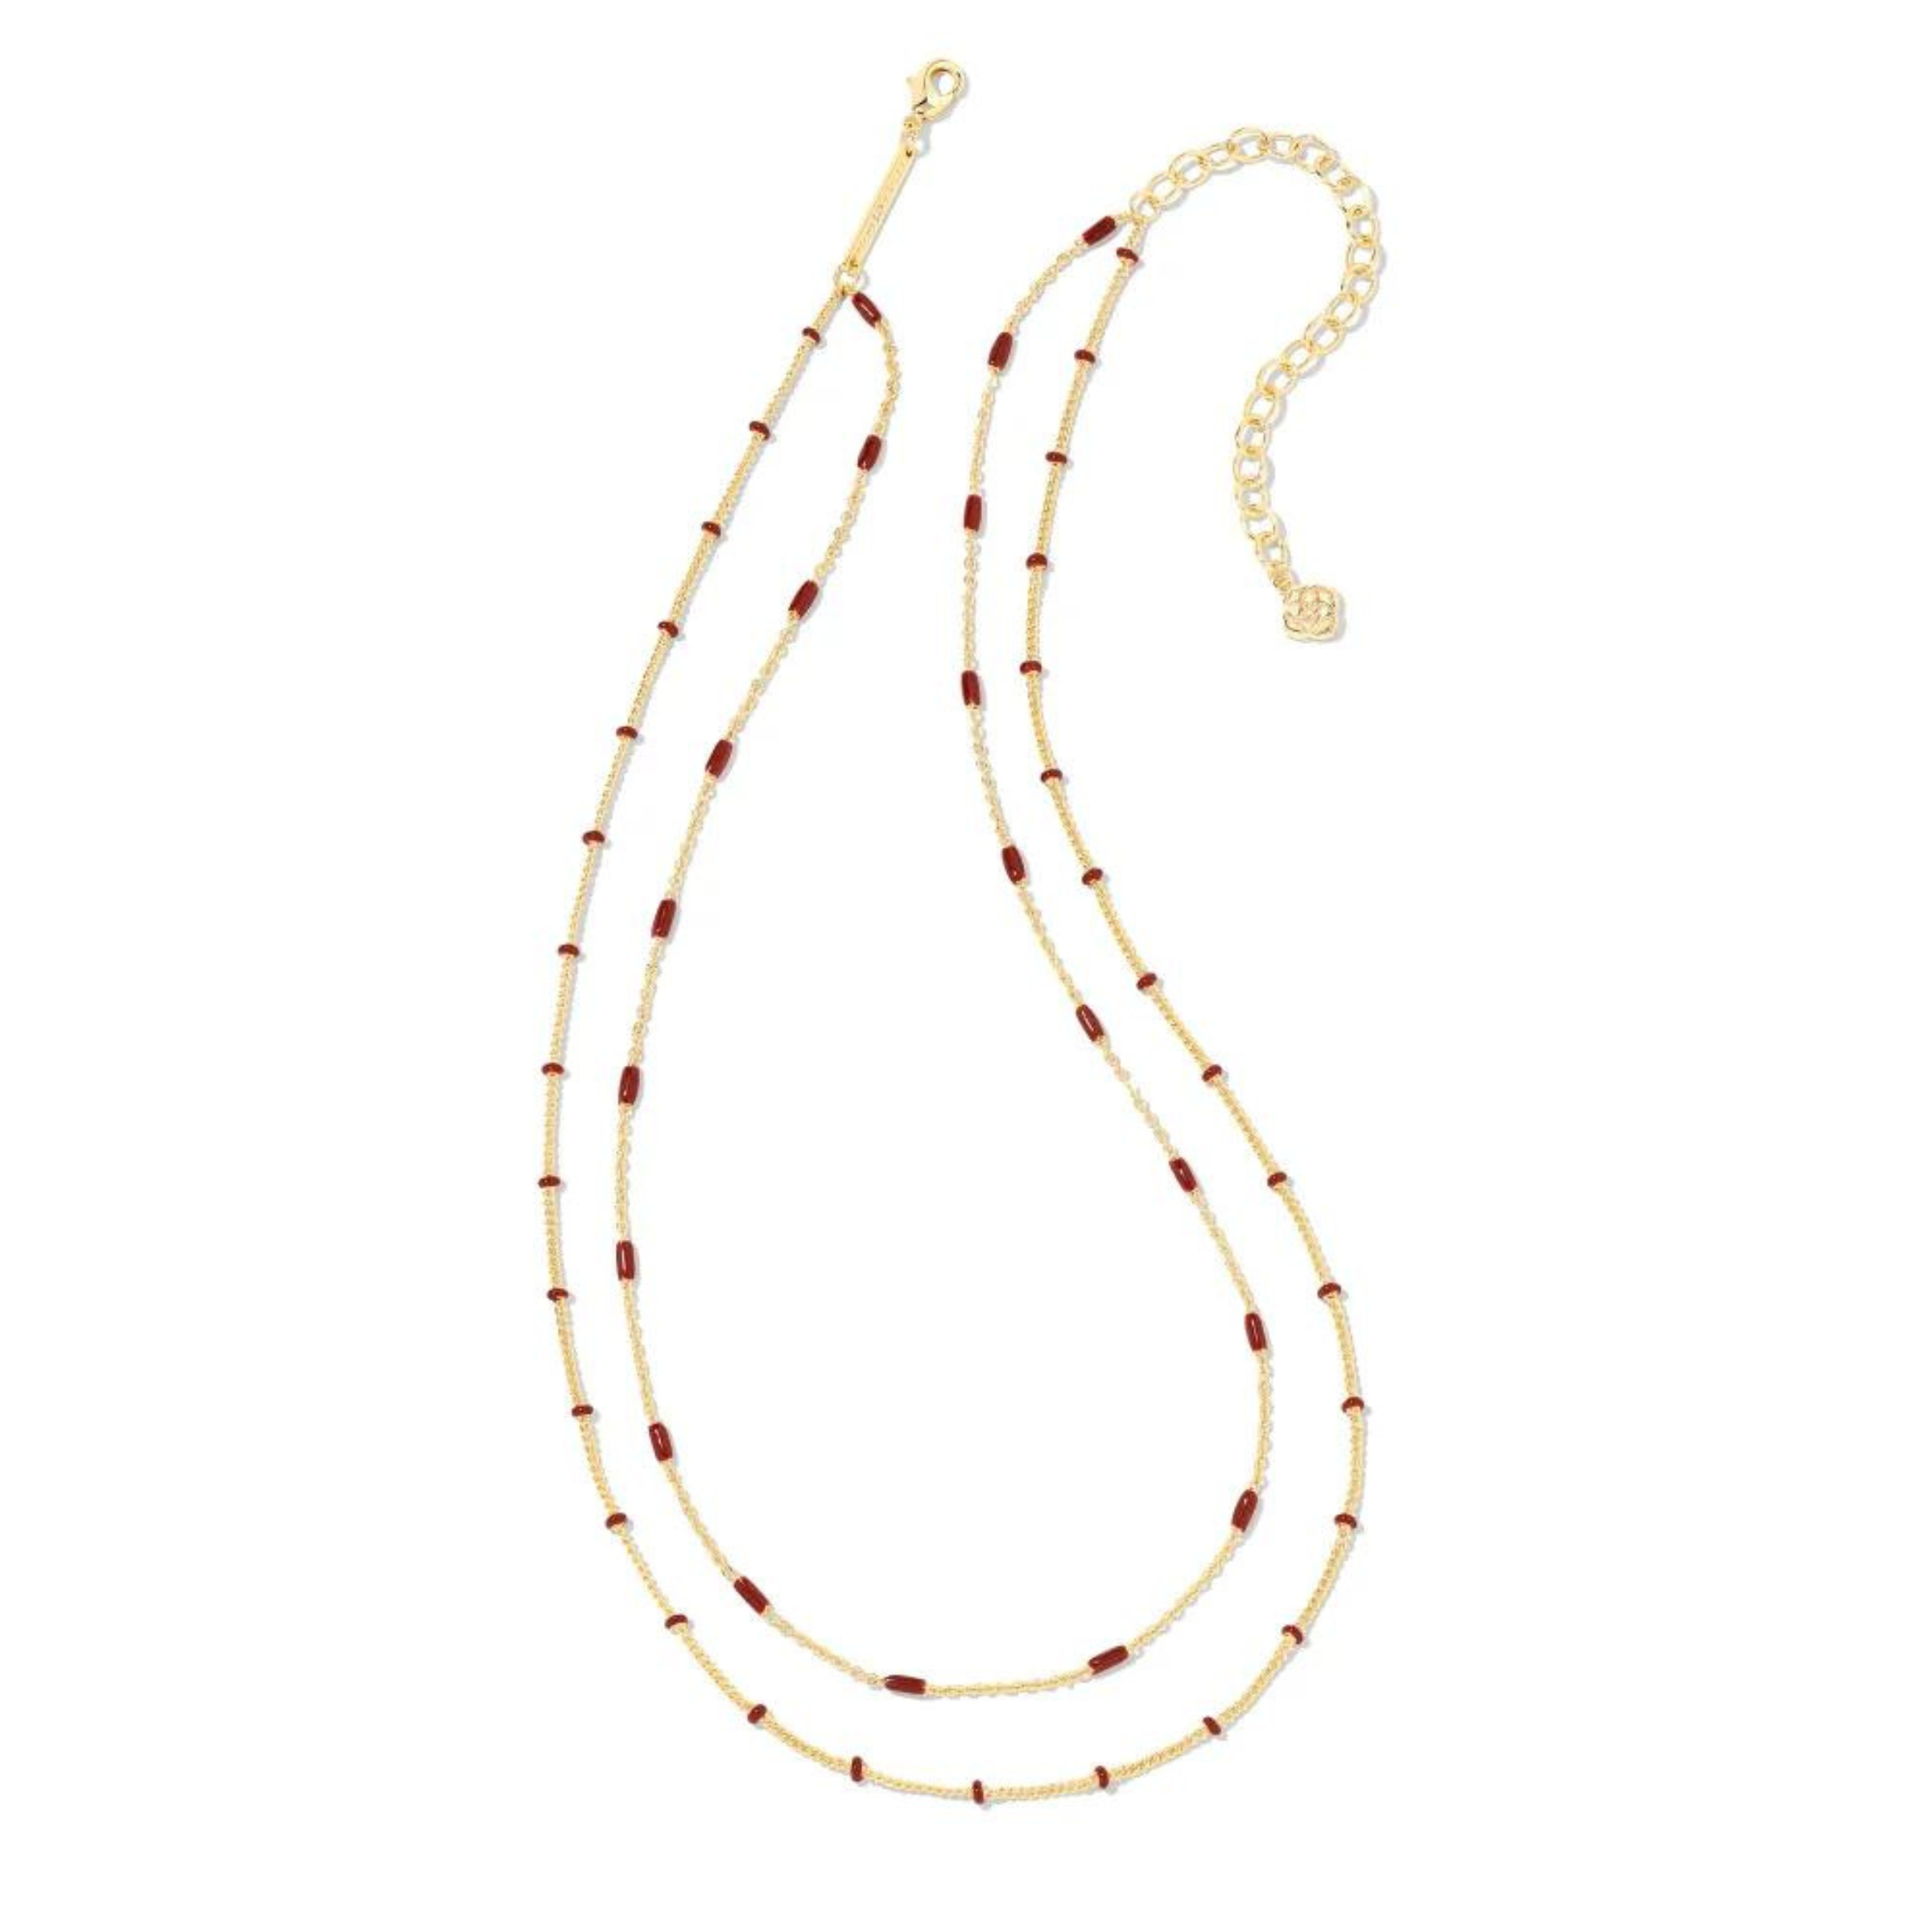 Two strand, adjustable chain necklace with burgundy enamel spacers. This necklace is pictured on a white background. 